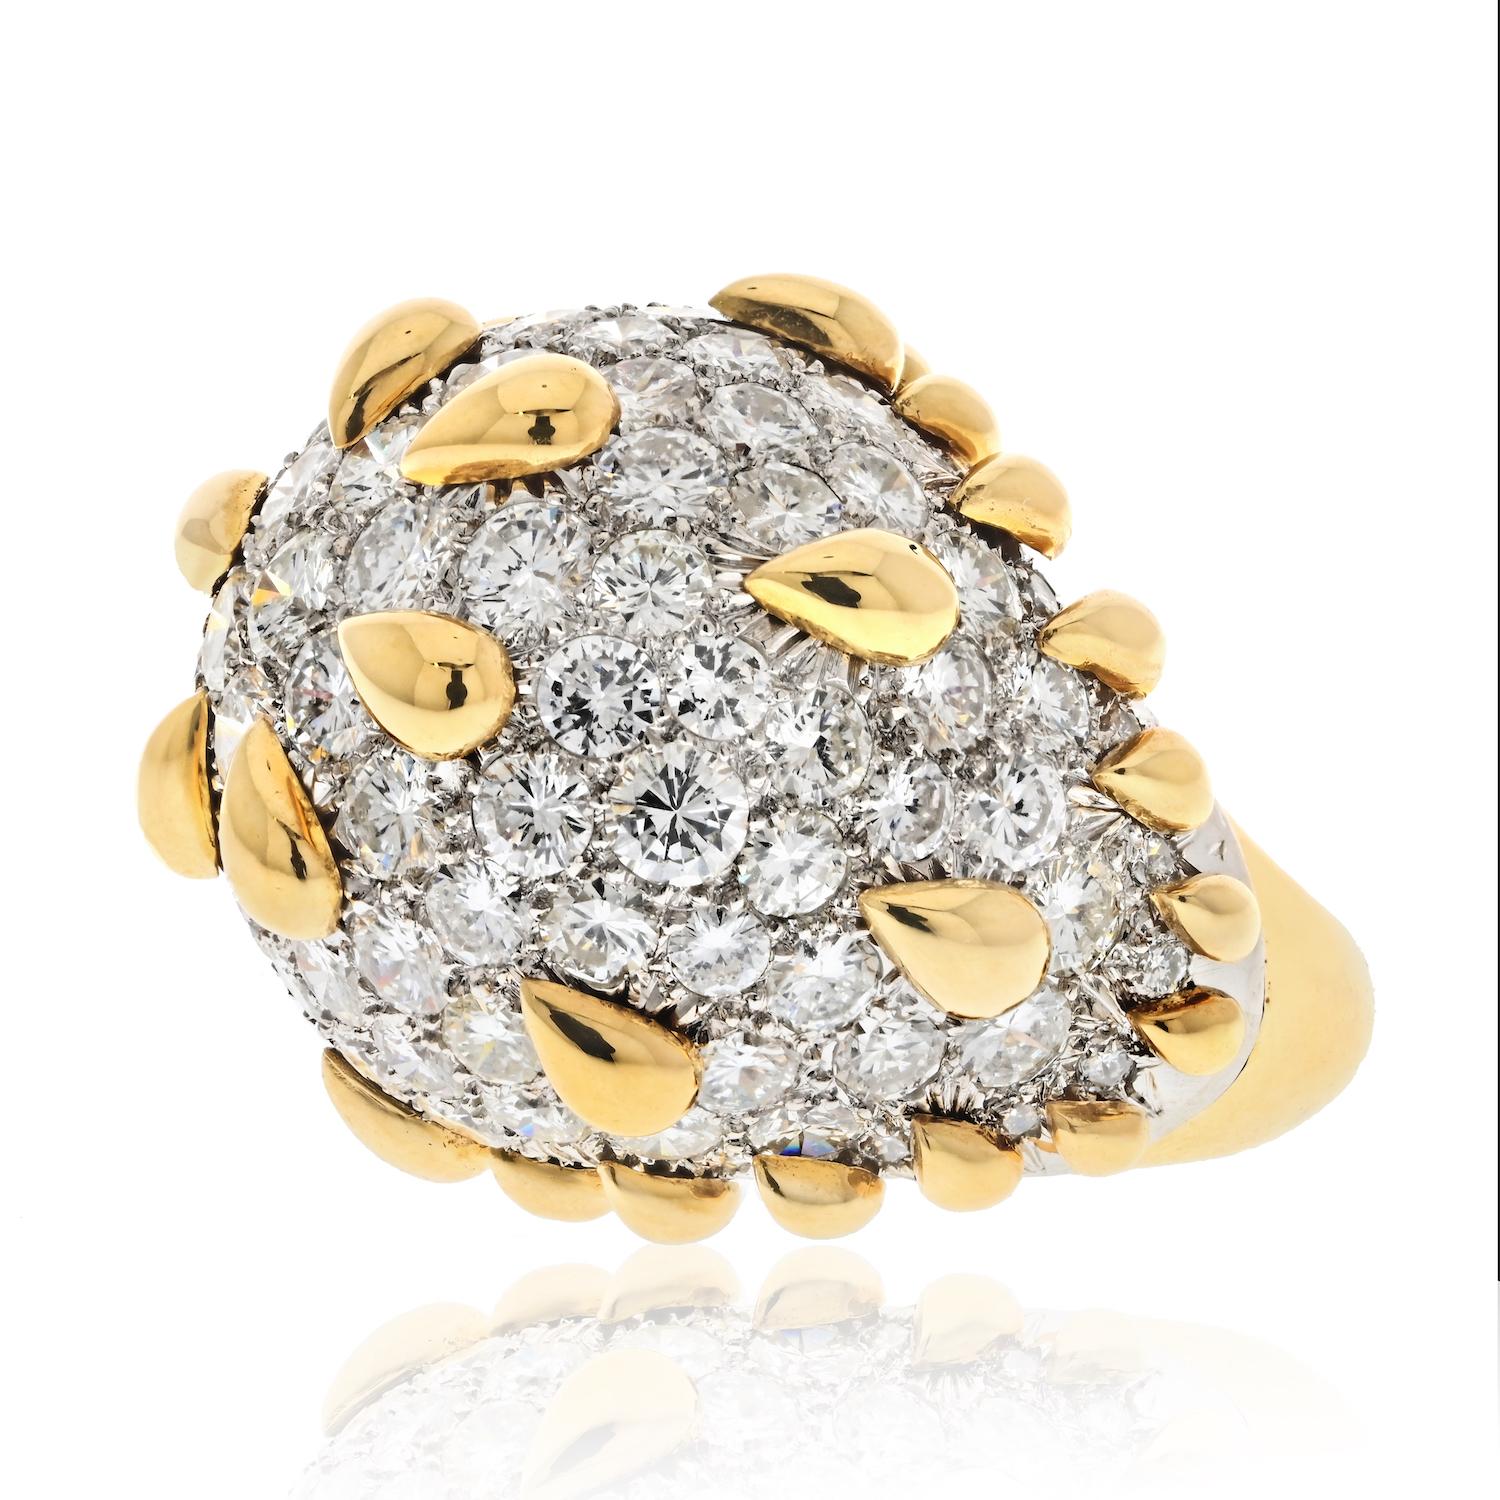 The diamond dome ring designed by David Webb is a true masterpiece of jewelry design. It is crafted in platinum and 18k yellow gold, which give the ring a classic and timeless appeal. The ring features a stunning diamond dome surface that sparkles